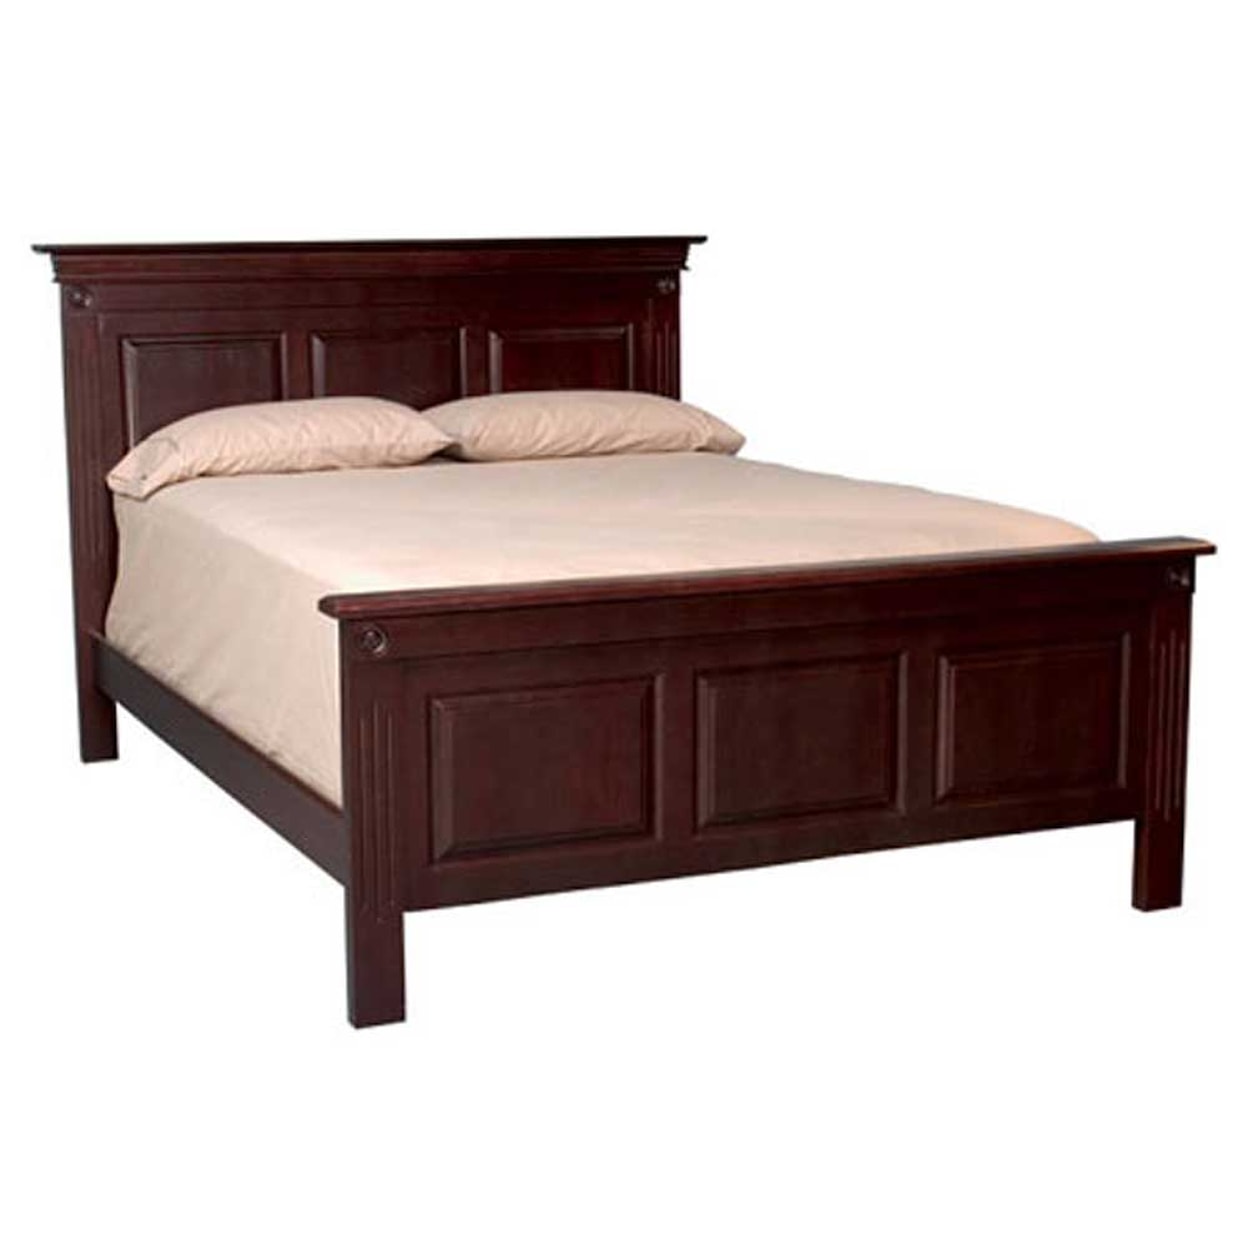 Simply Amish Imperial Amish Full 3-Panel Bed